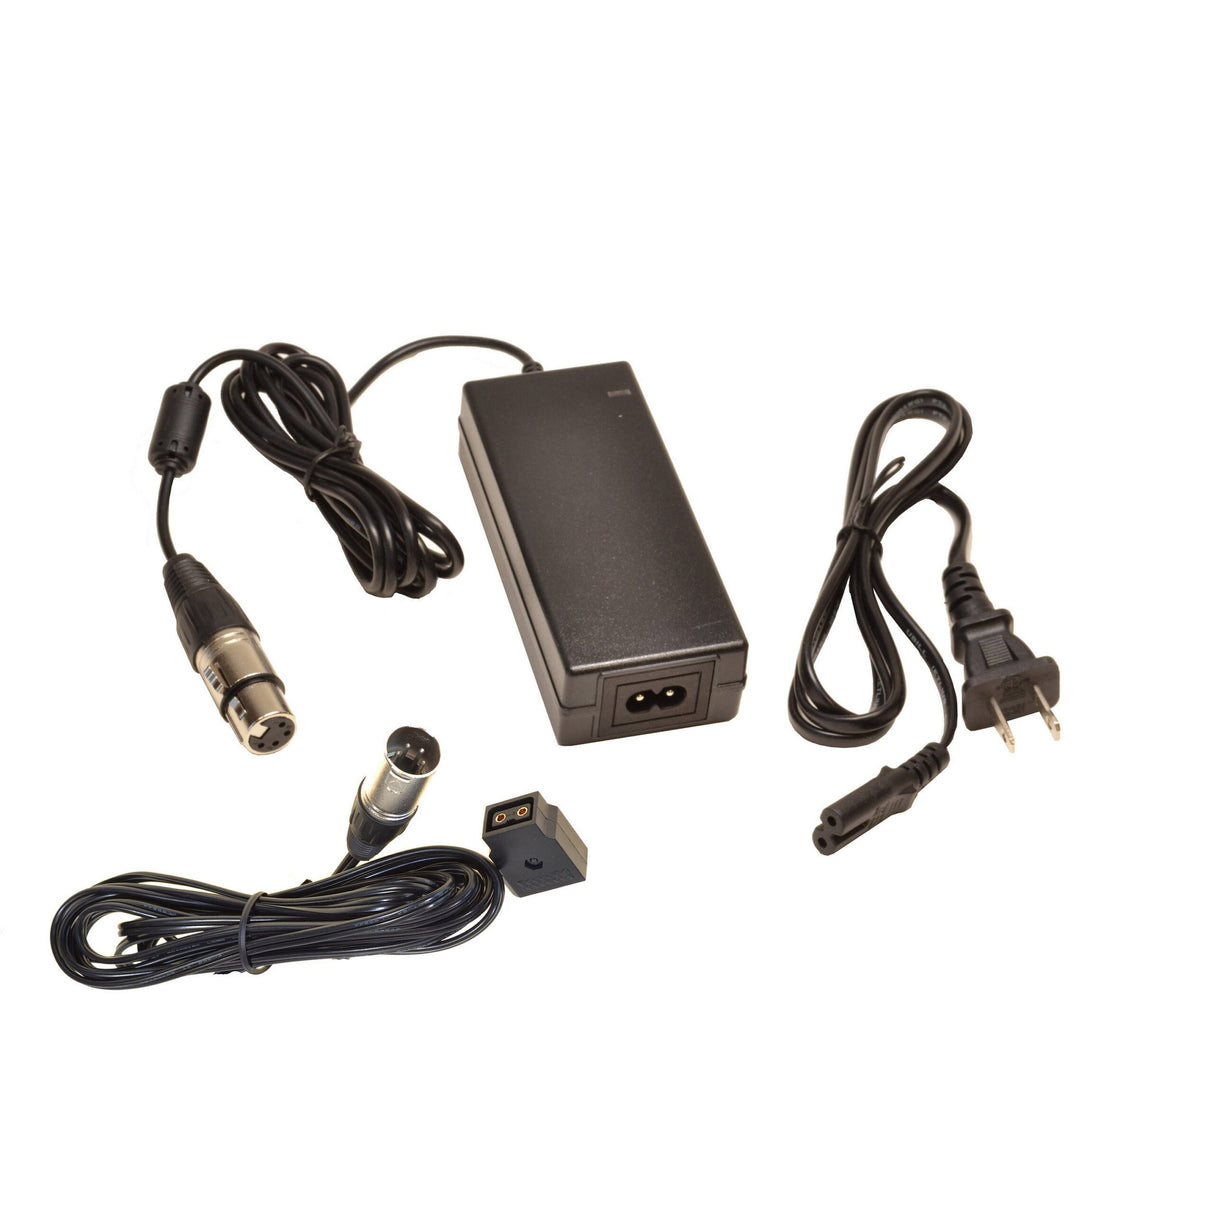 Bescor PSA-124DT 12V/5A XLR AC Adapter with D-Tap Female Adapter